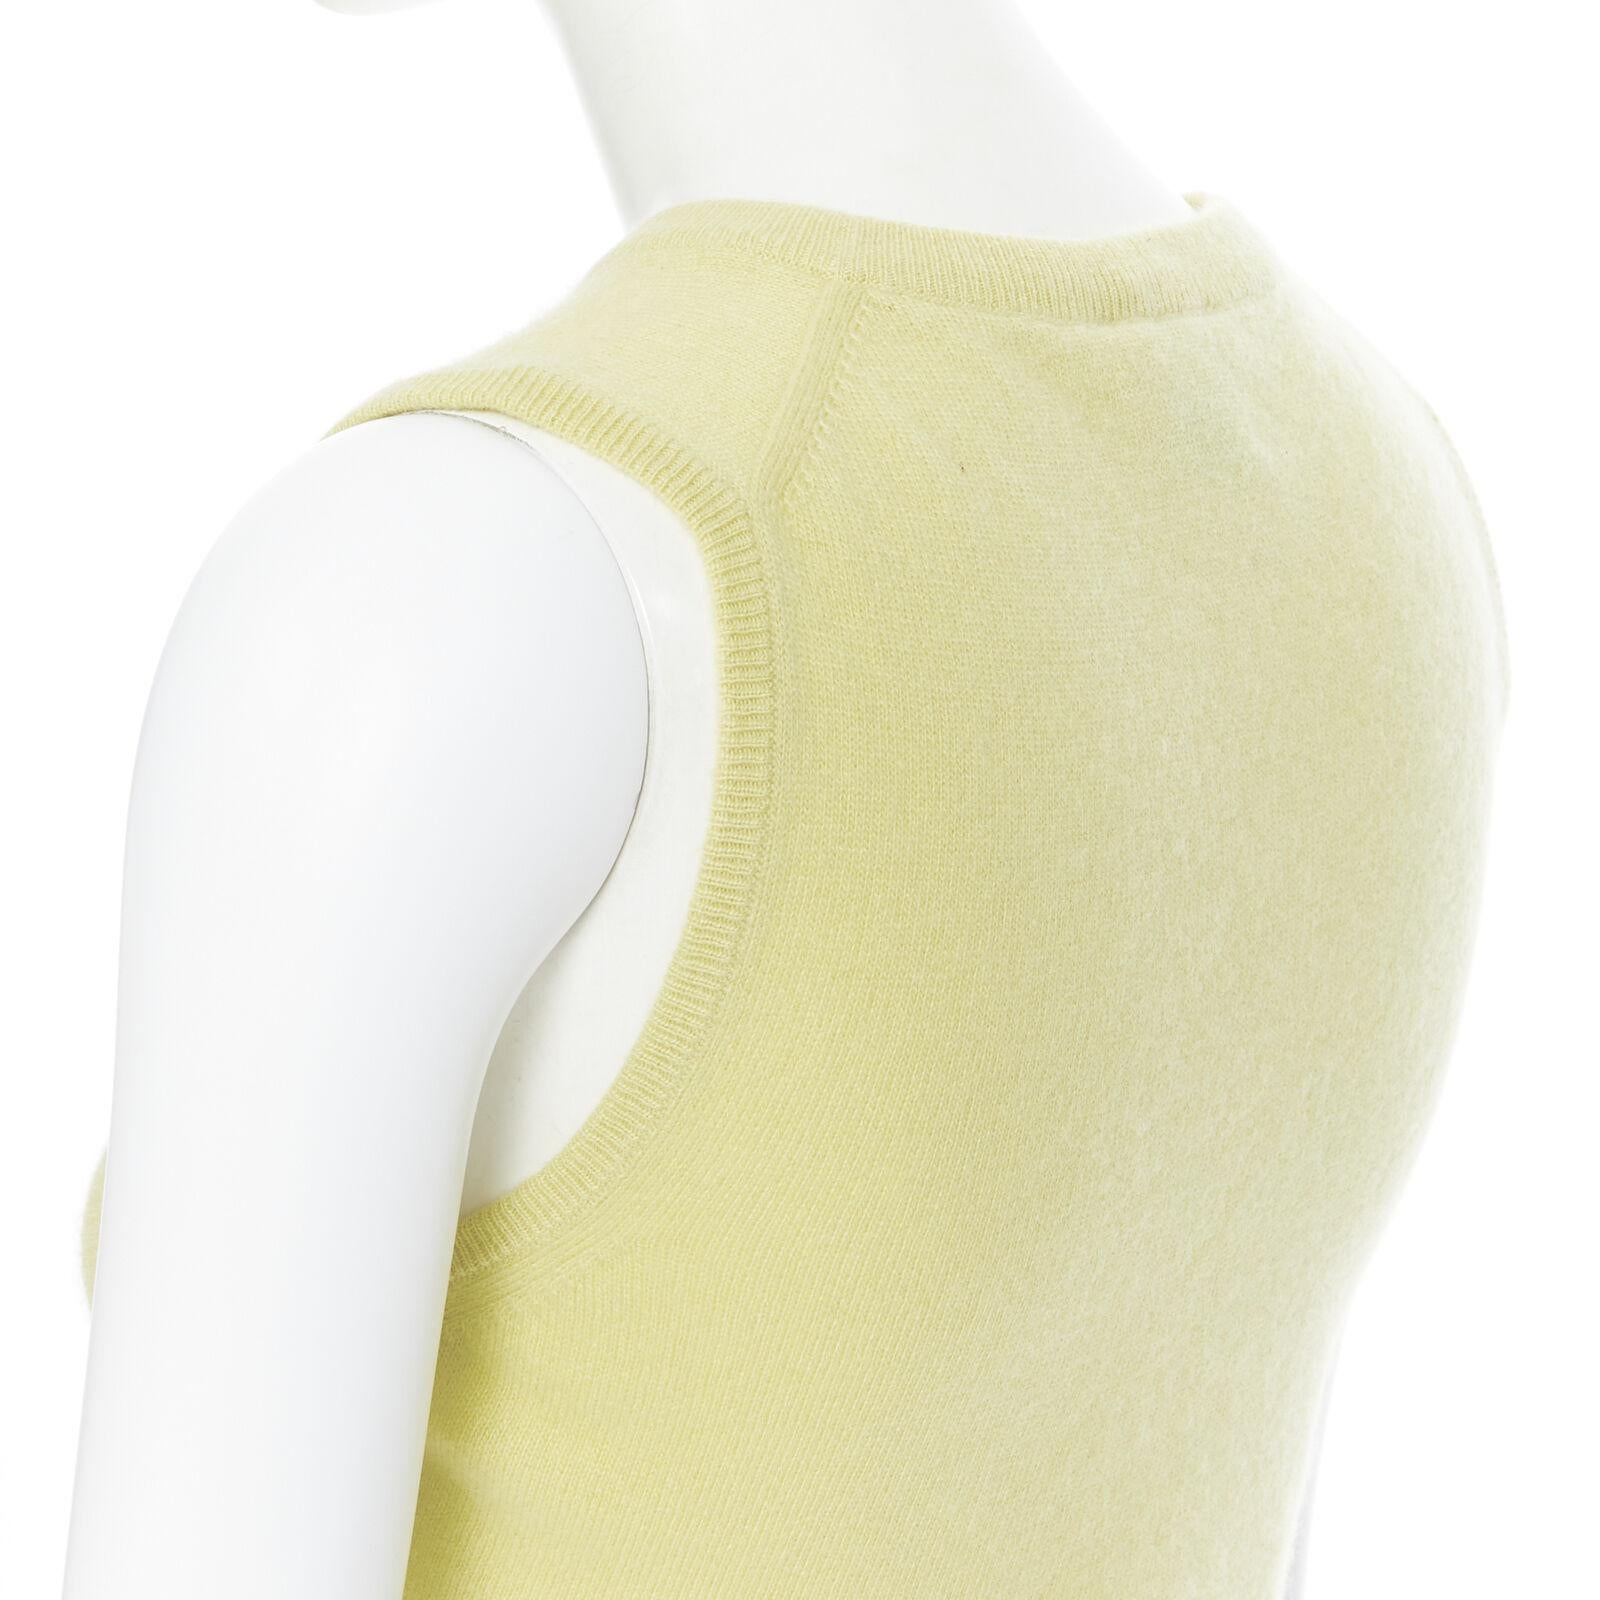 vintage HERMES 100% pure cashmere yellow knitted short sleeveless vest sweater S 2